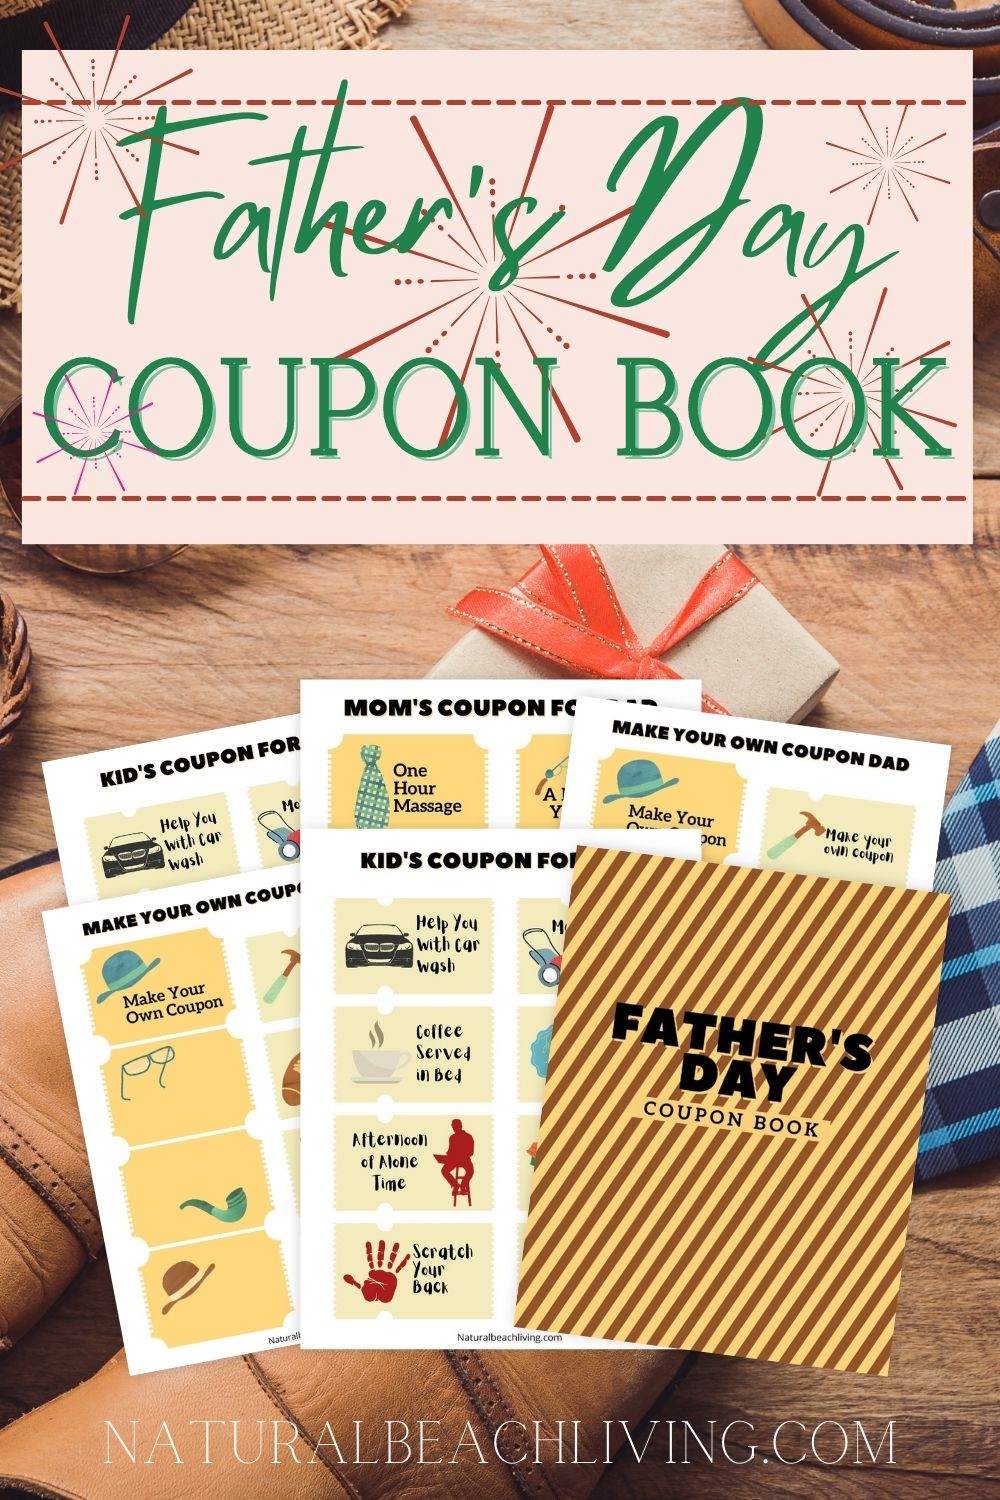 Father's Day Coupon Book and Great Father’s Day Printable Gift Ideas, this free Father's Day coupon book is full of fun and creative coupons you can give your dad as a gift! From coupons for breakfast in bed to some quality time together, this coupon book has everything you need to show your dad how much he means to you.